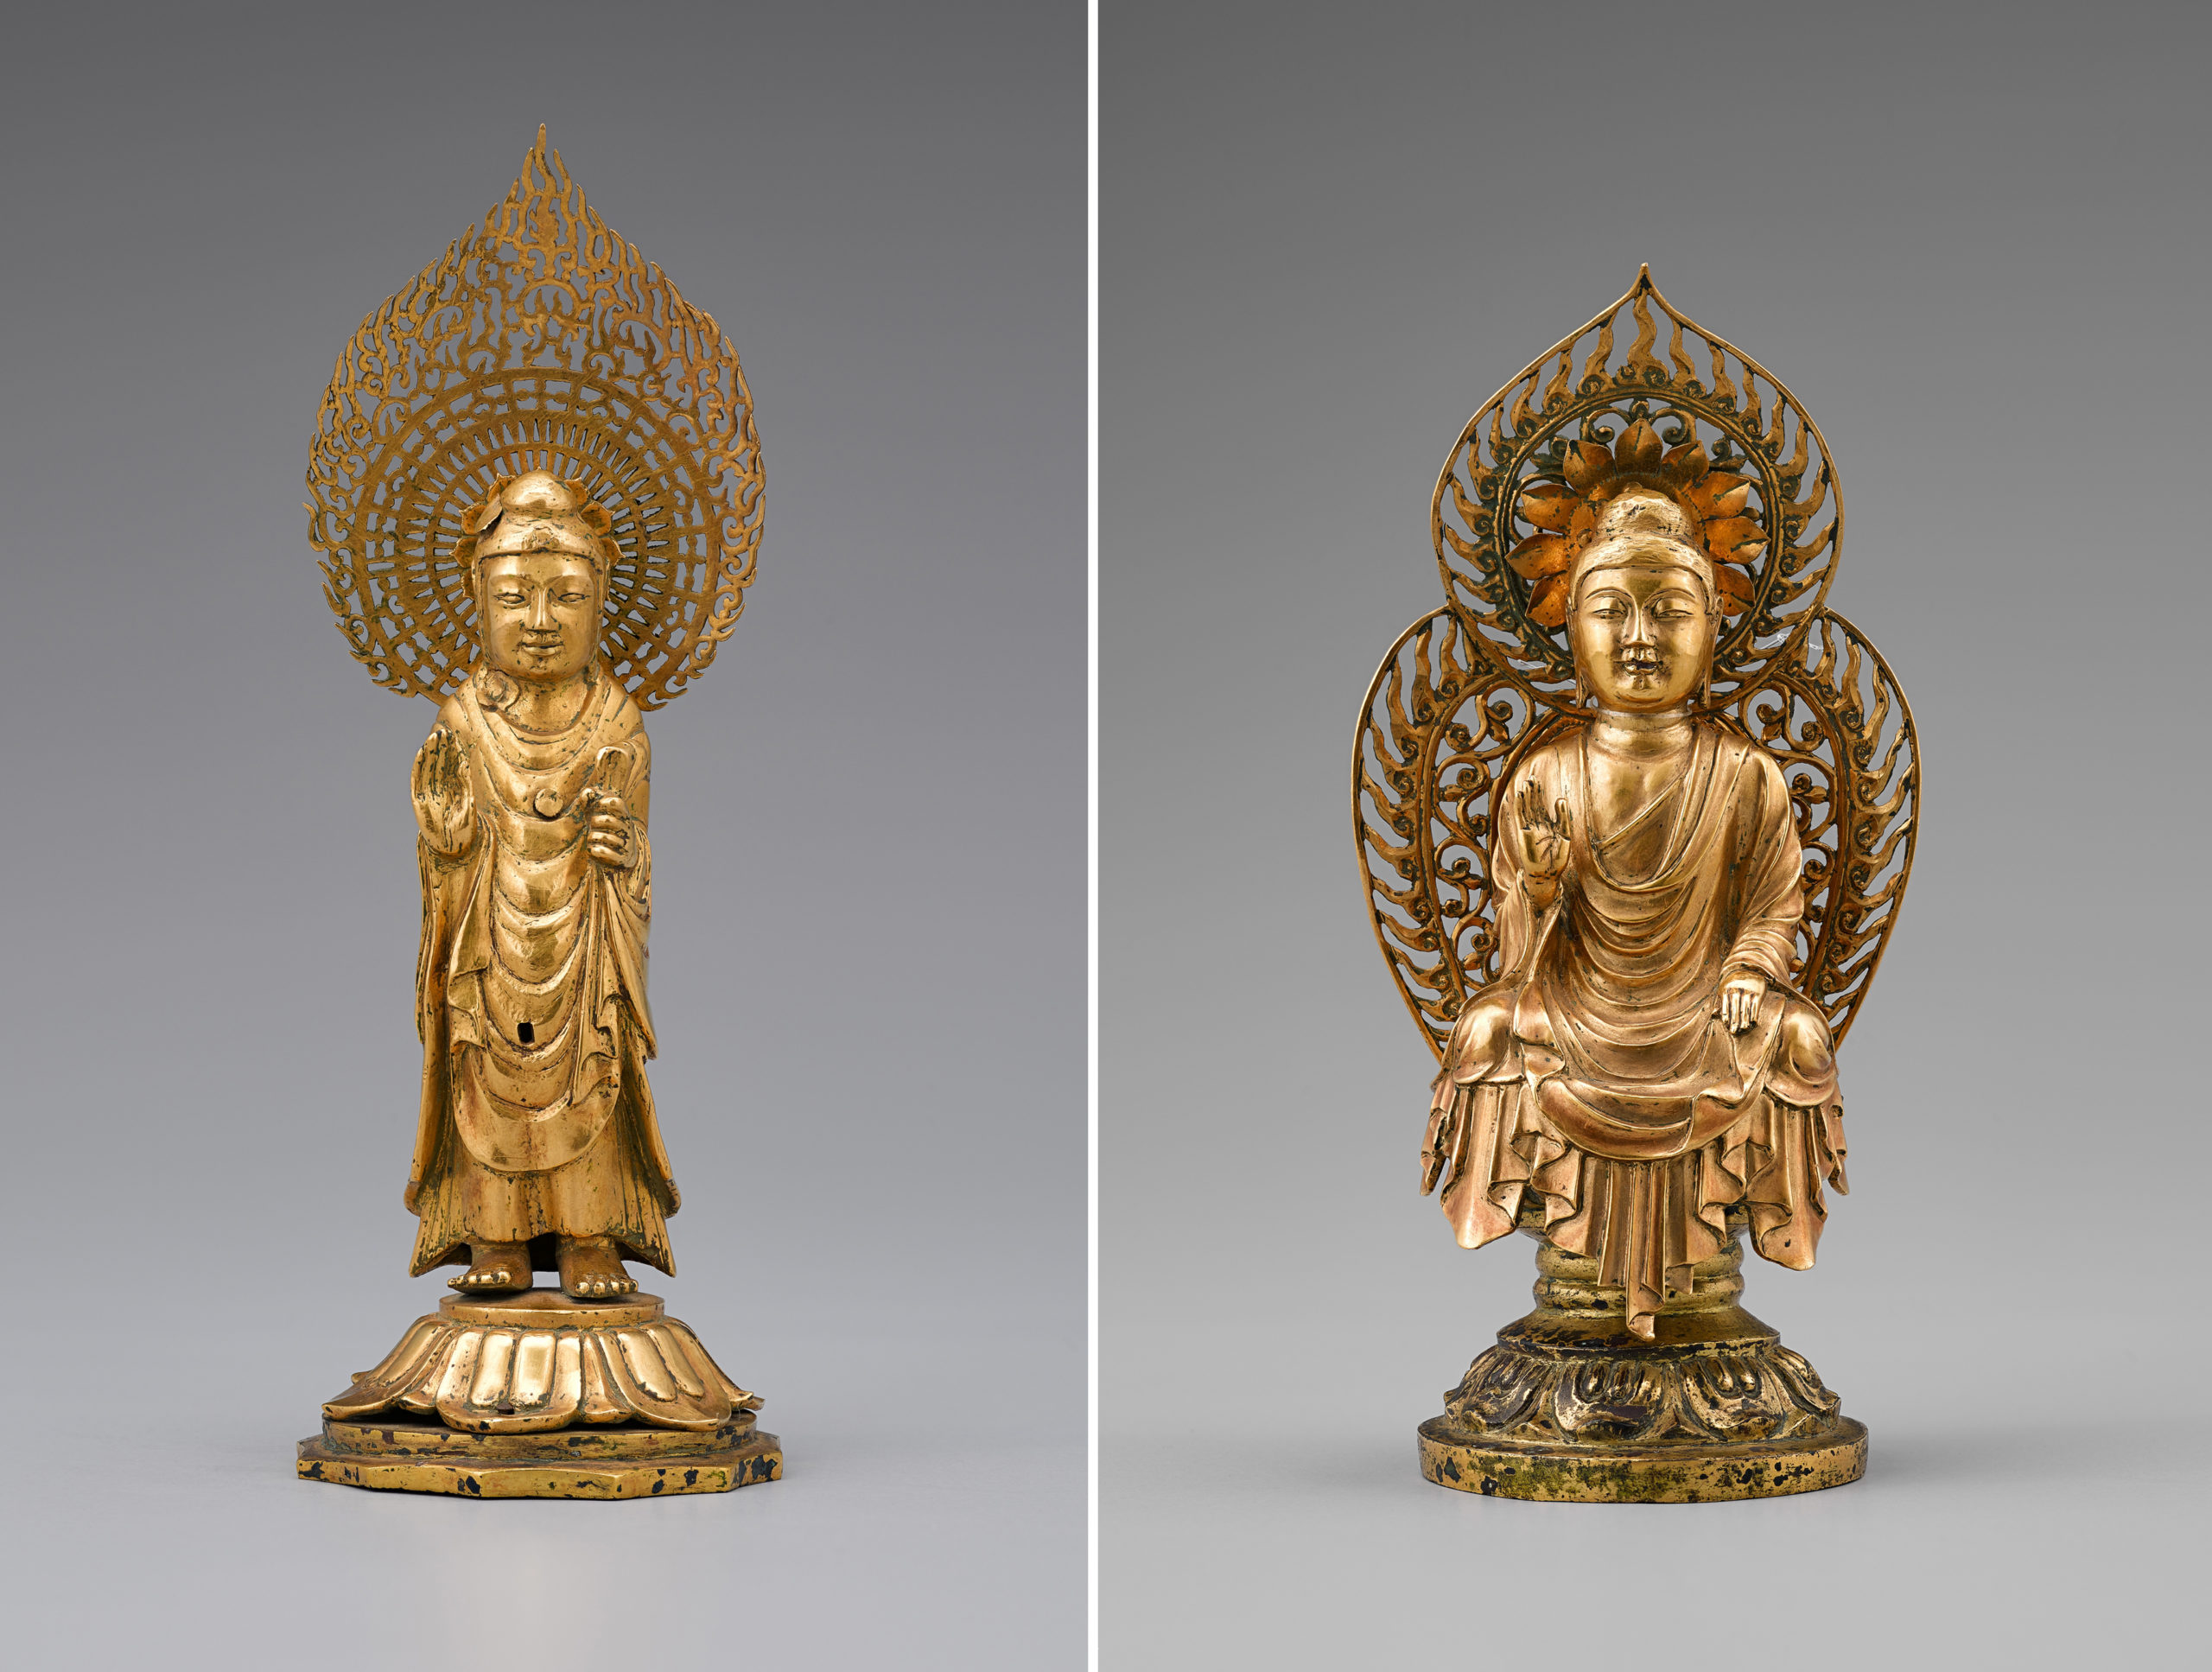 Gold Buddha statues from the stone pagoda on the site of